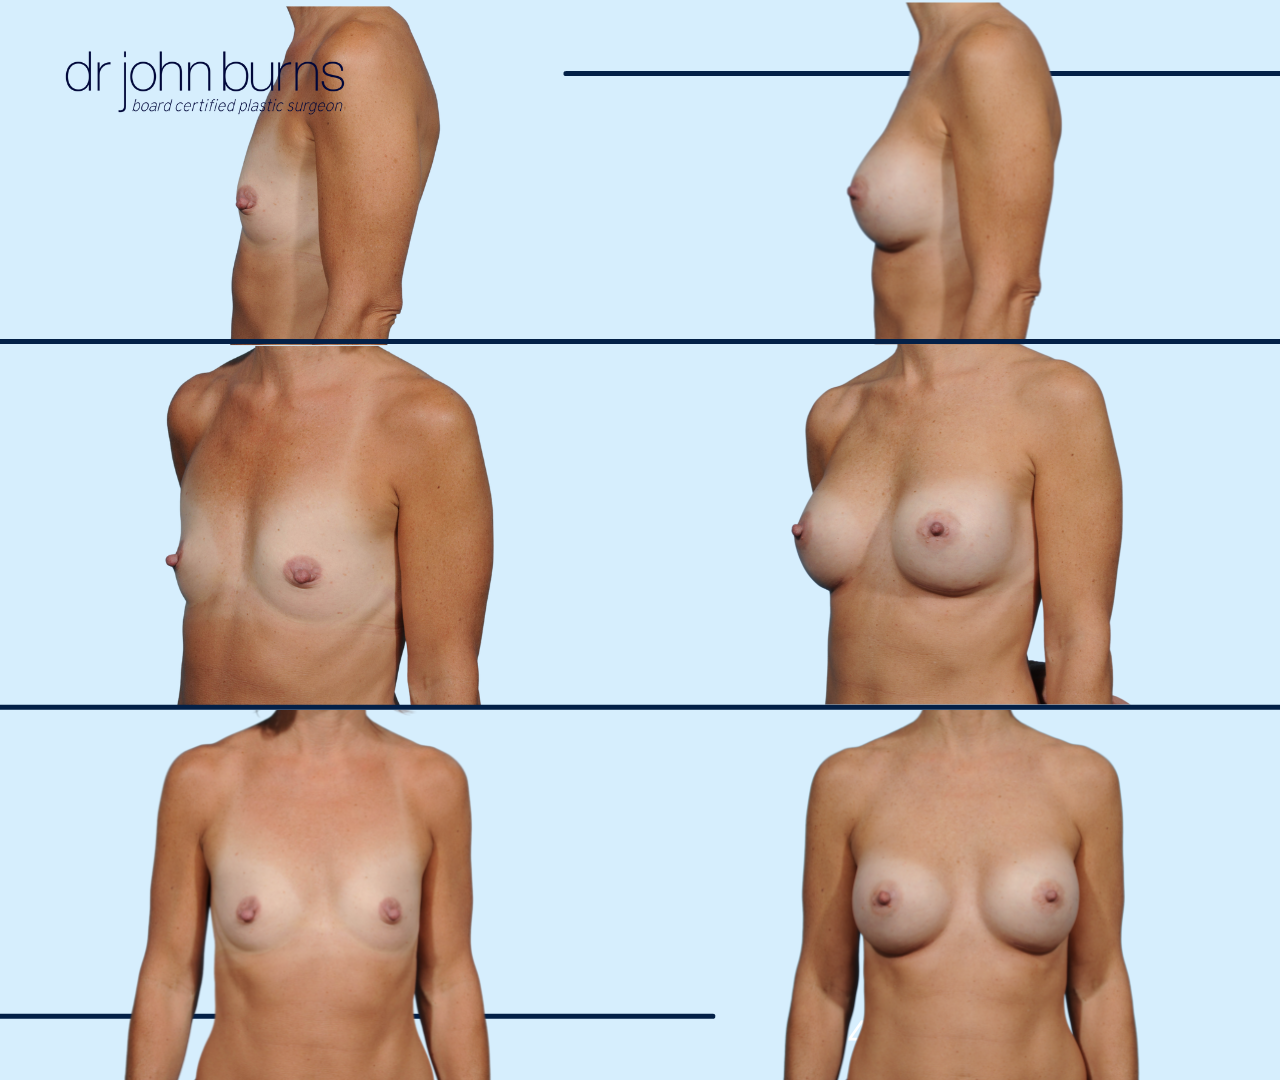 Dallas Breast Implants- Before and After Breast Implants in Dallas, Texas